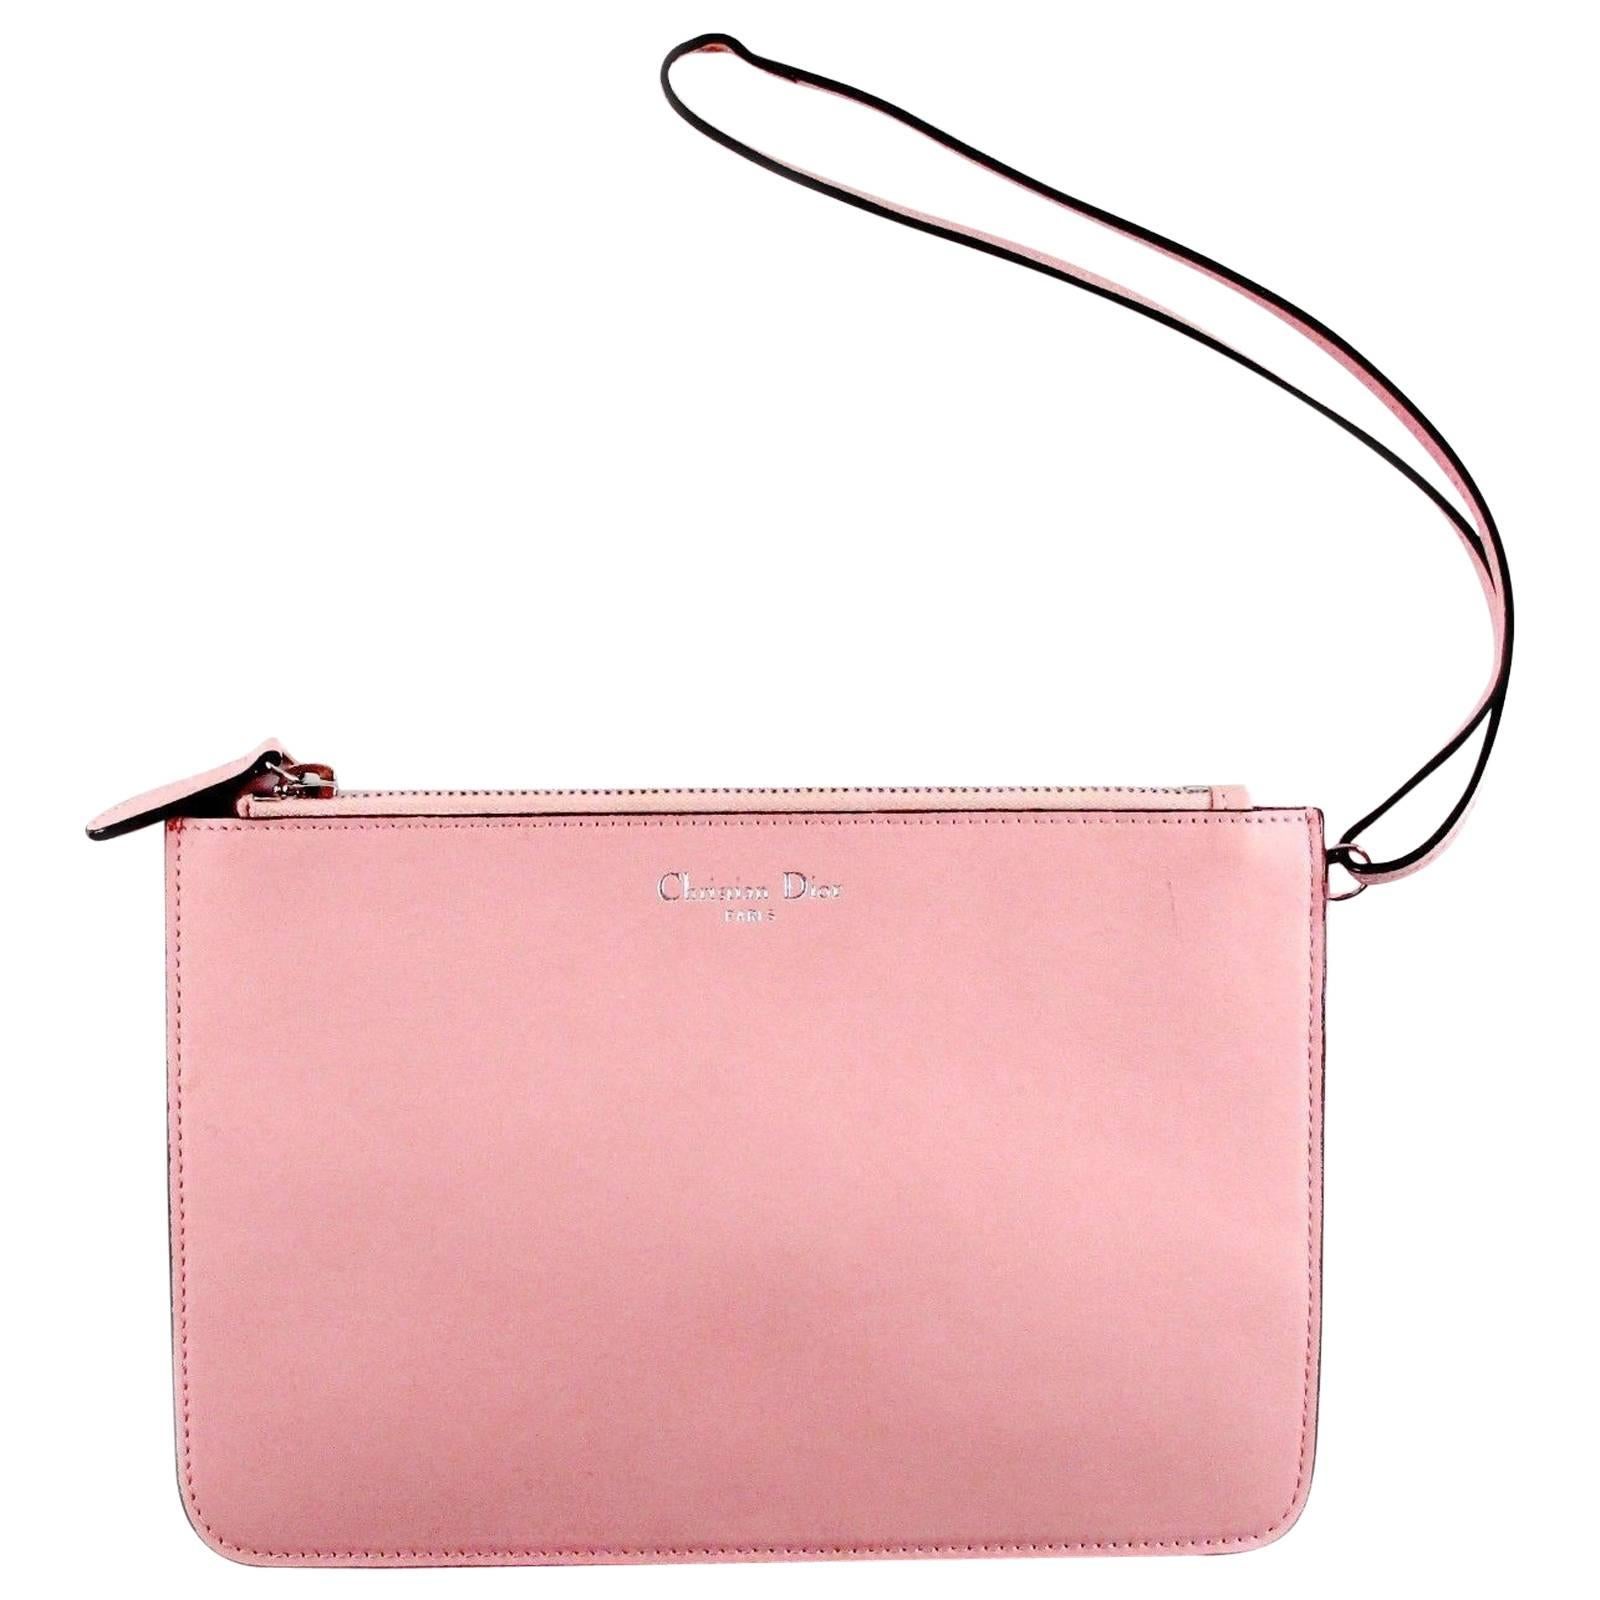 Christian Dior - Zip Pouch with Wrist Strap For Sale